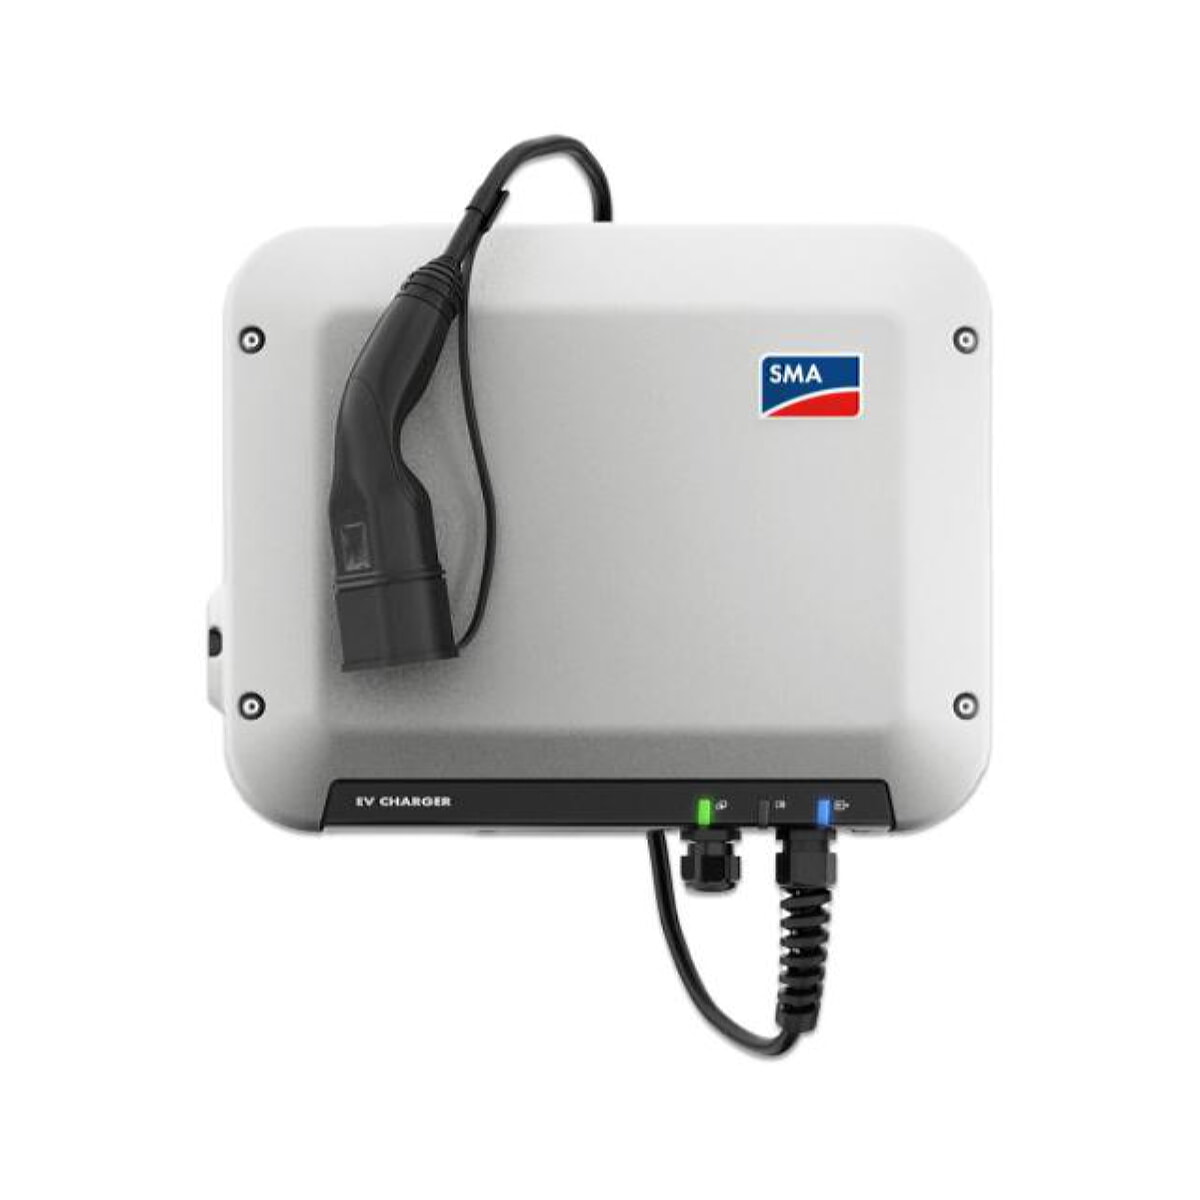 SMA EV CHARGER 7.4 Single-phase AC charging station with 10 m charging cable